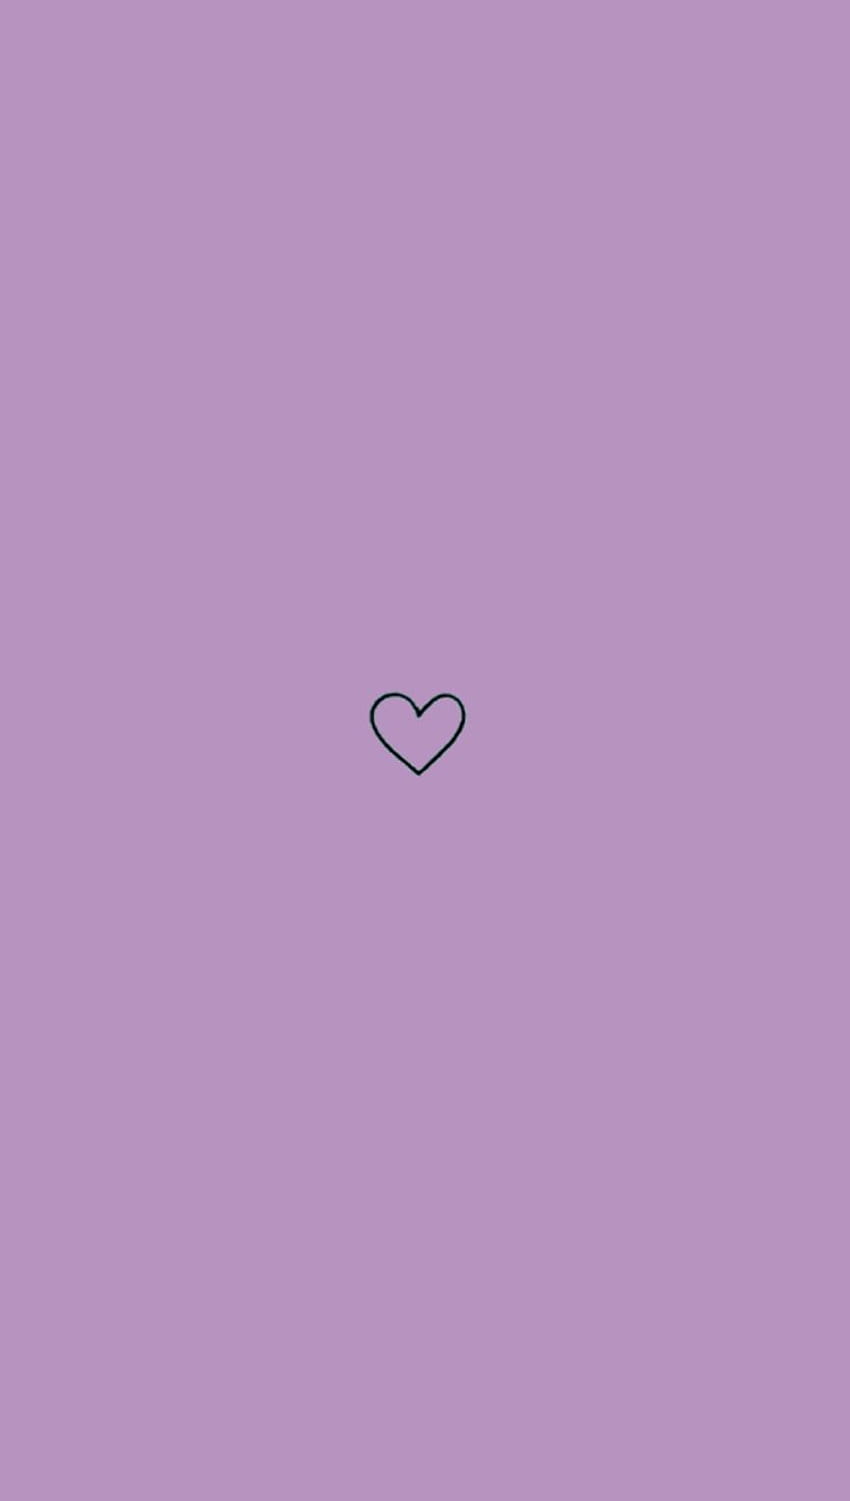 A heart shaped icon on purple background - Pastel purple